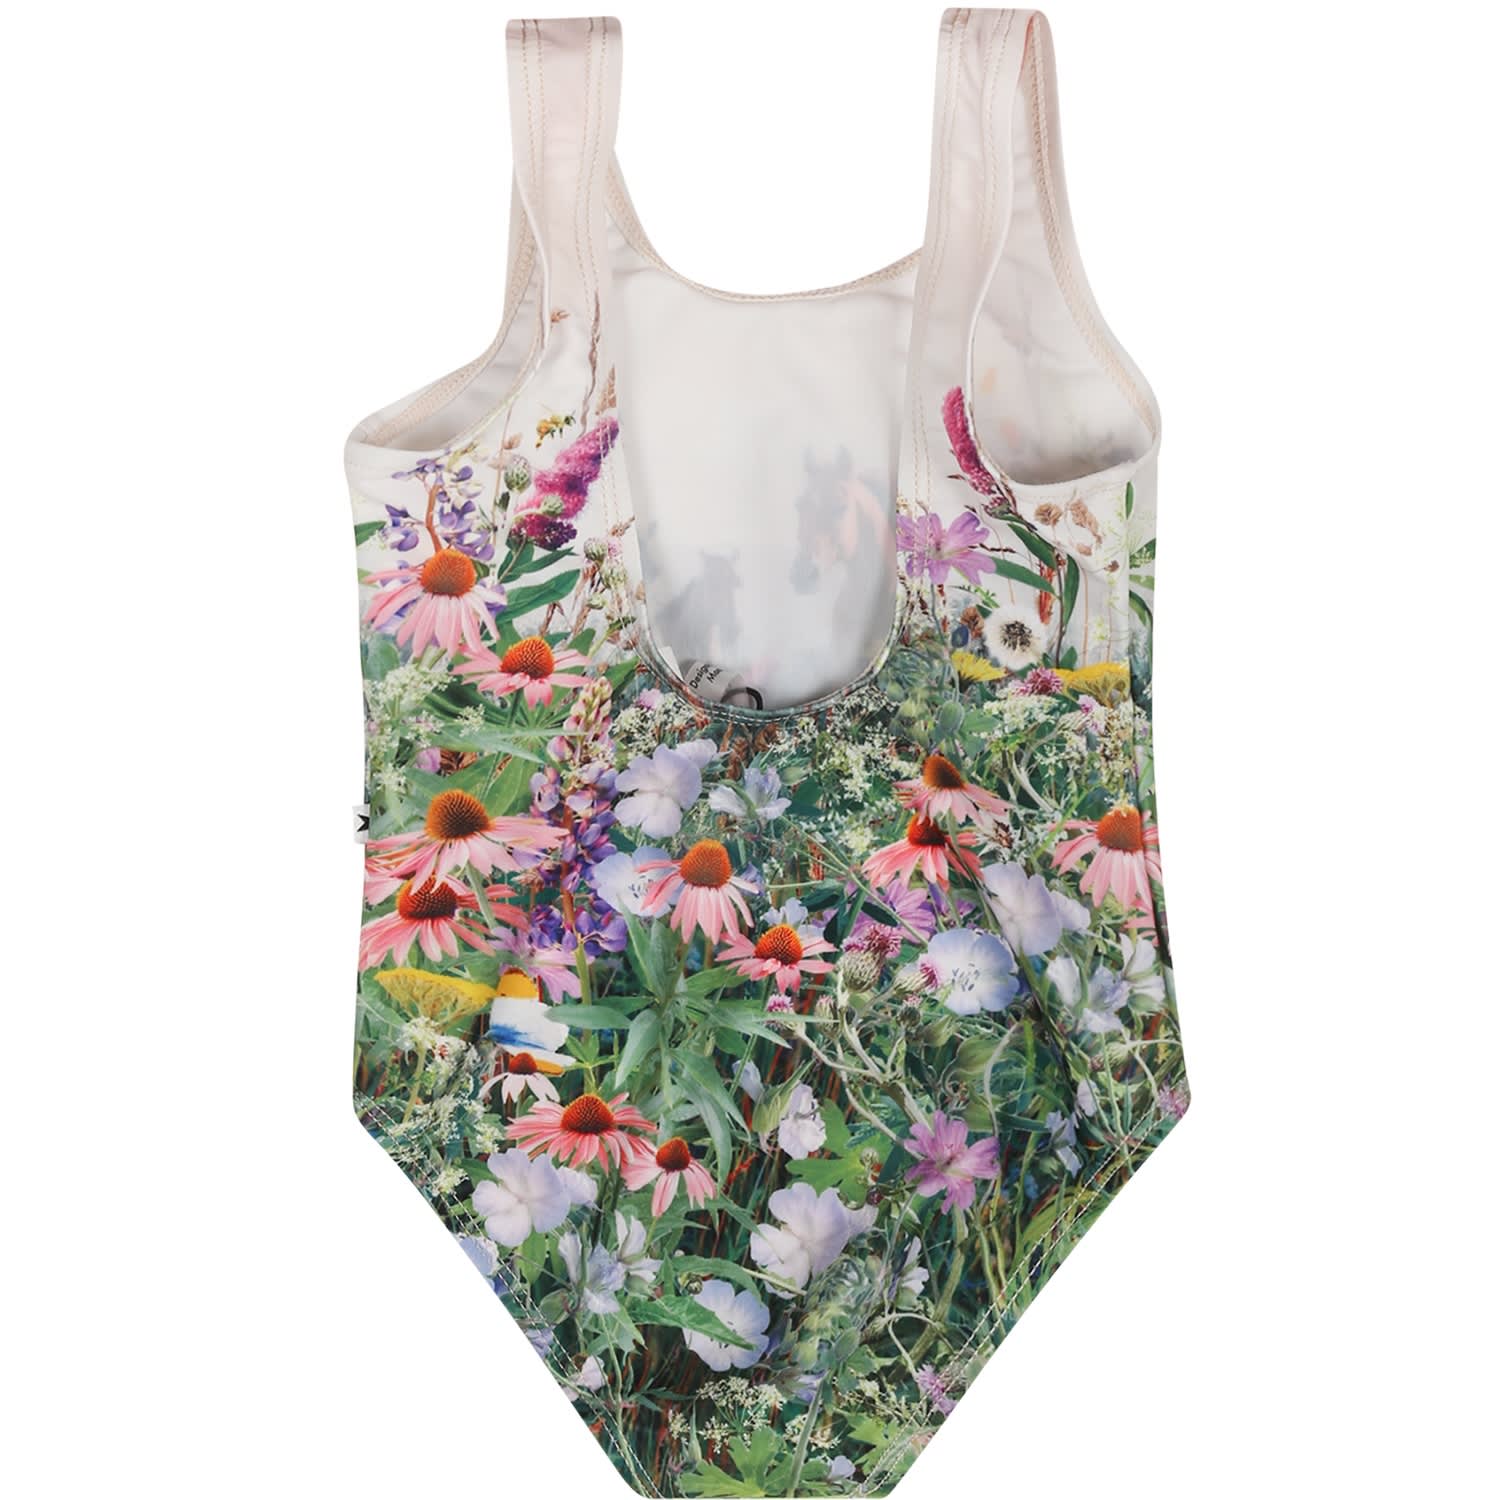 Shop Molo Ivory Swimsuit For Baby Girl With Horses And Flowers Print